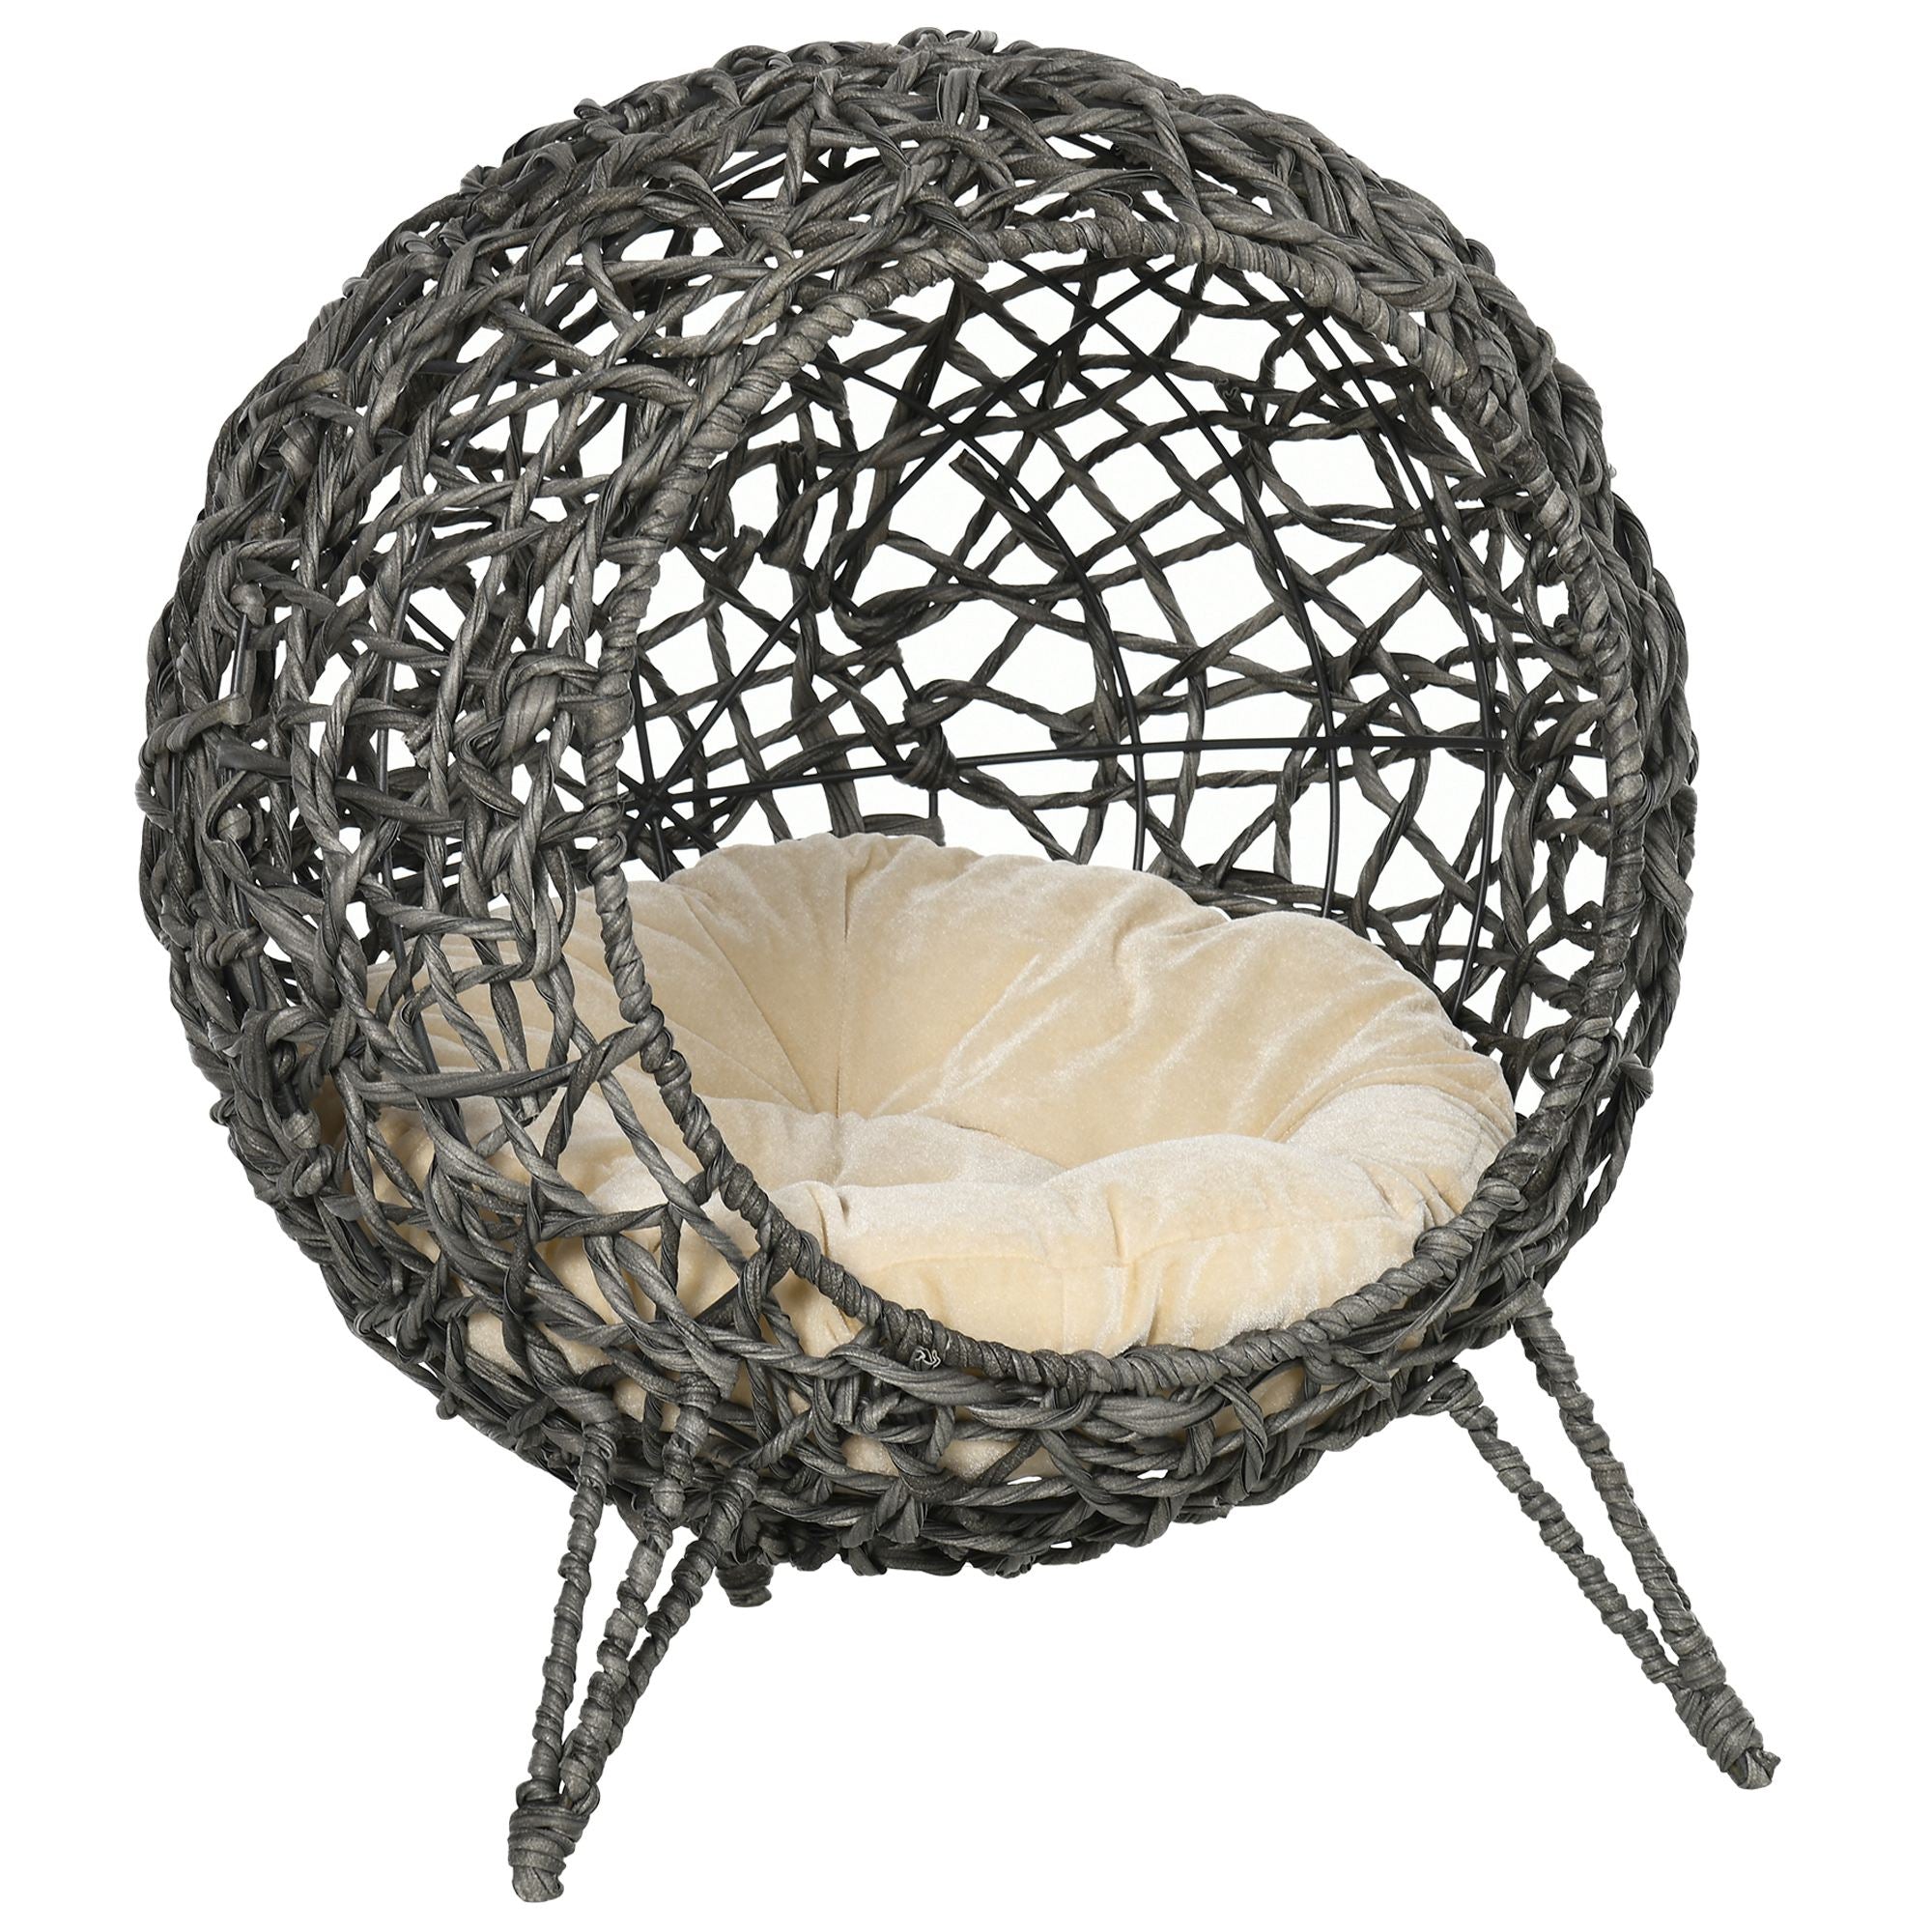 Rattan Elevated Cat Bed House Kitten Basket Ball Shaped Pet Furniture w/ Removable Cushion - Silver-Tone and Grey-0